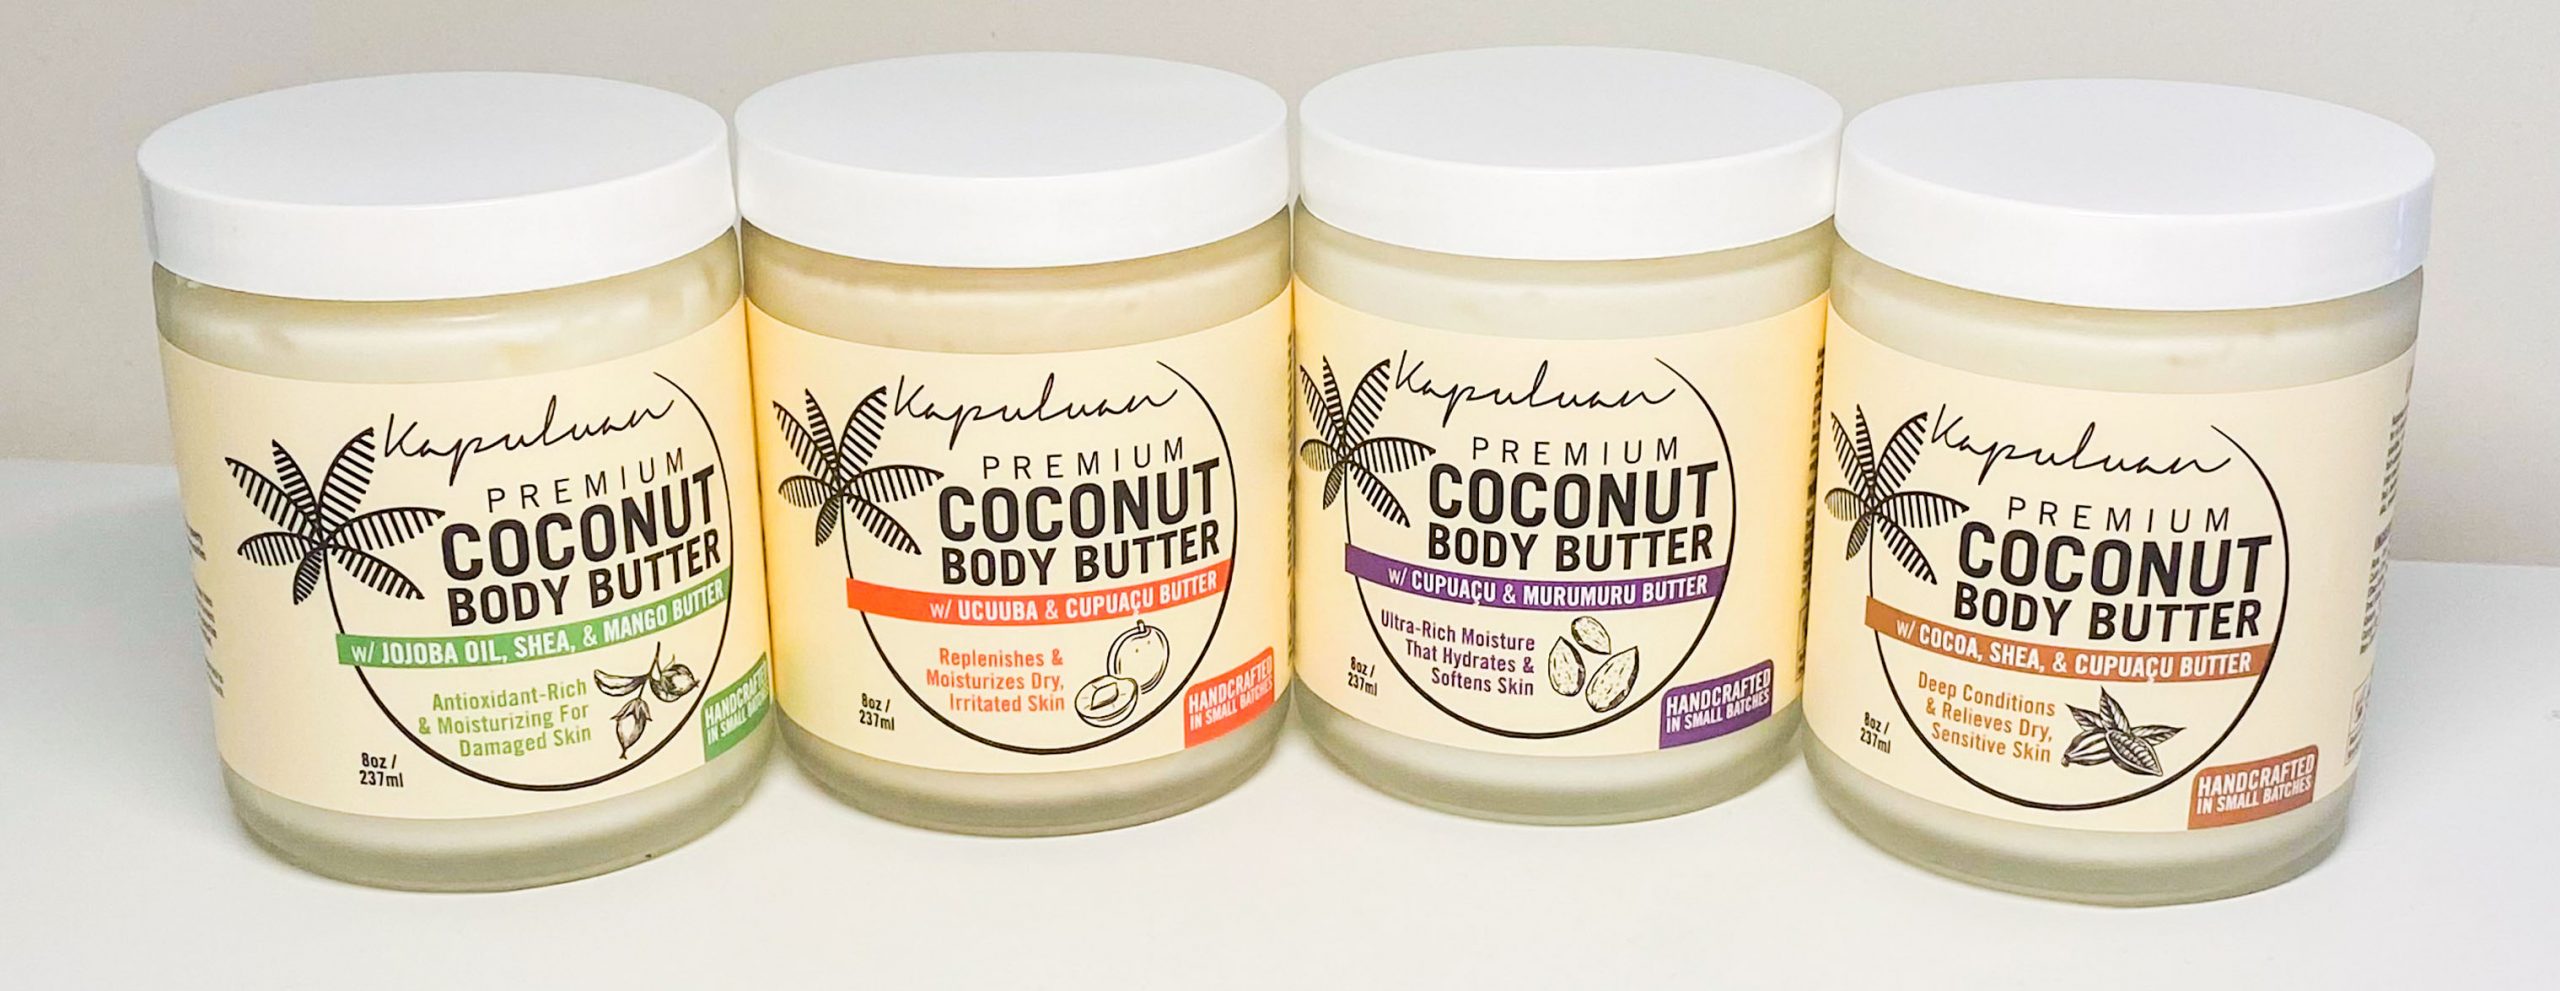 5 Awesome Benefits of Using Body Butters in Your Skincare Regimen